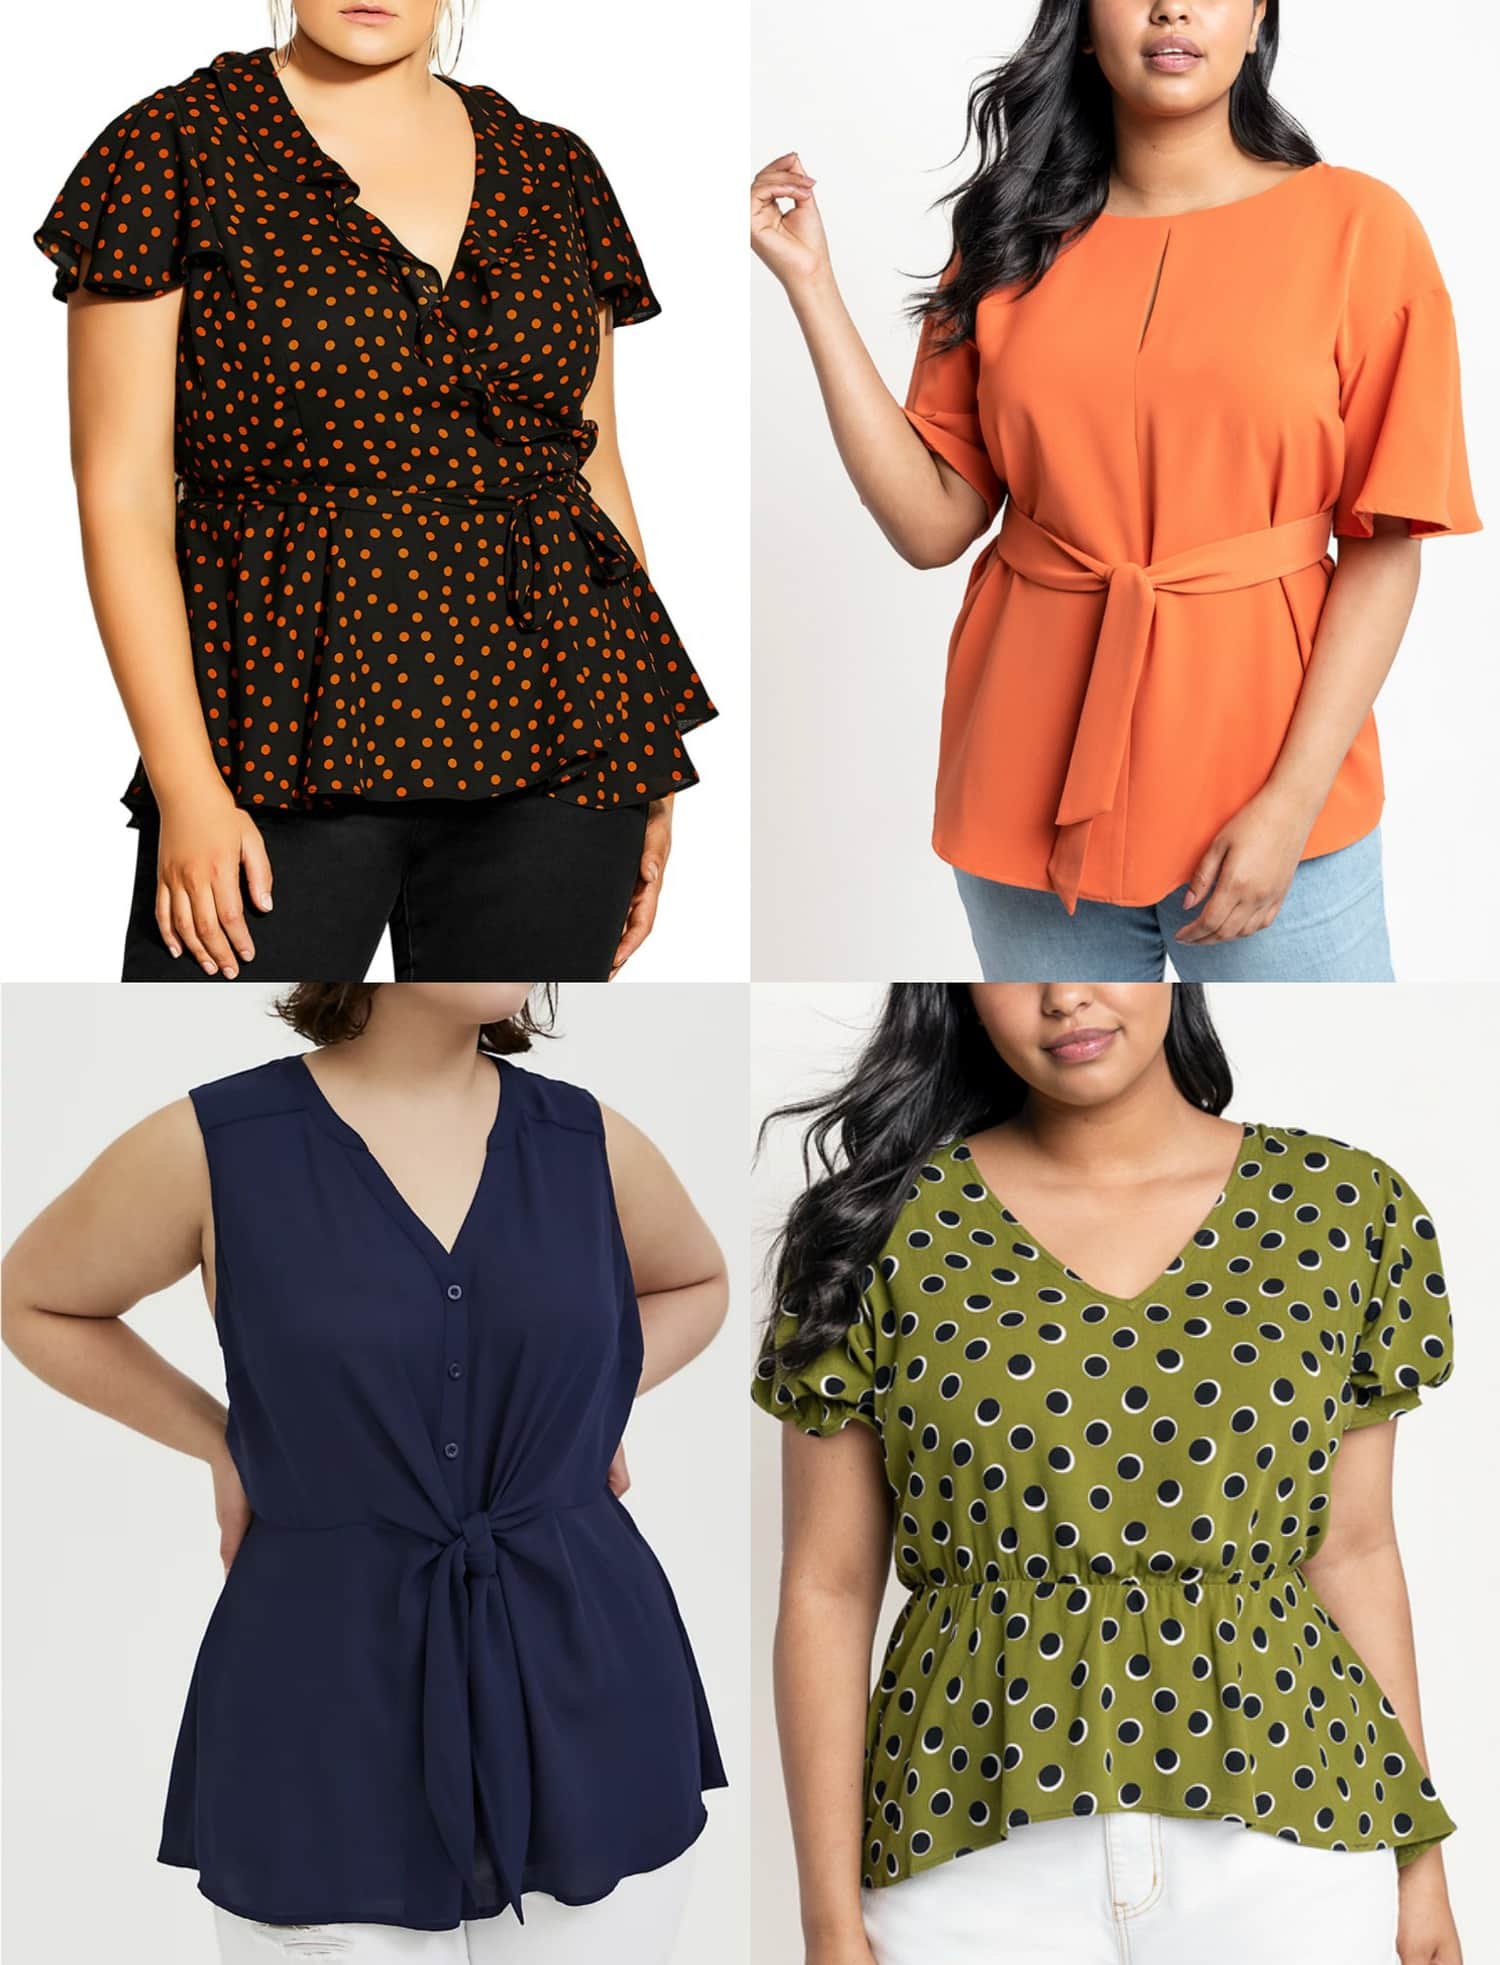 mimin: [37+] Plus Size Dress For Big Tummy And Hips